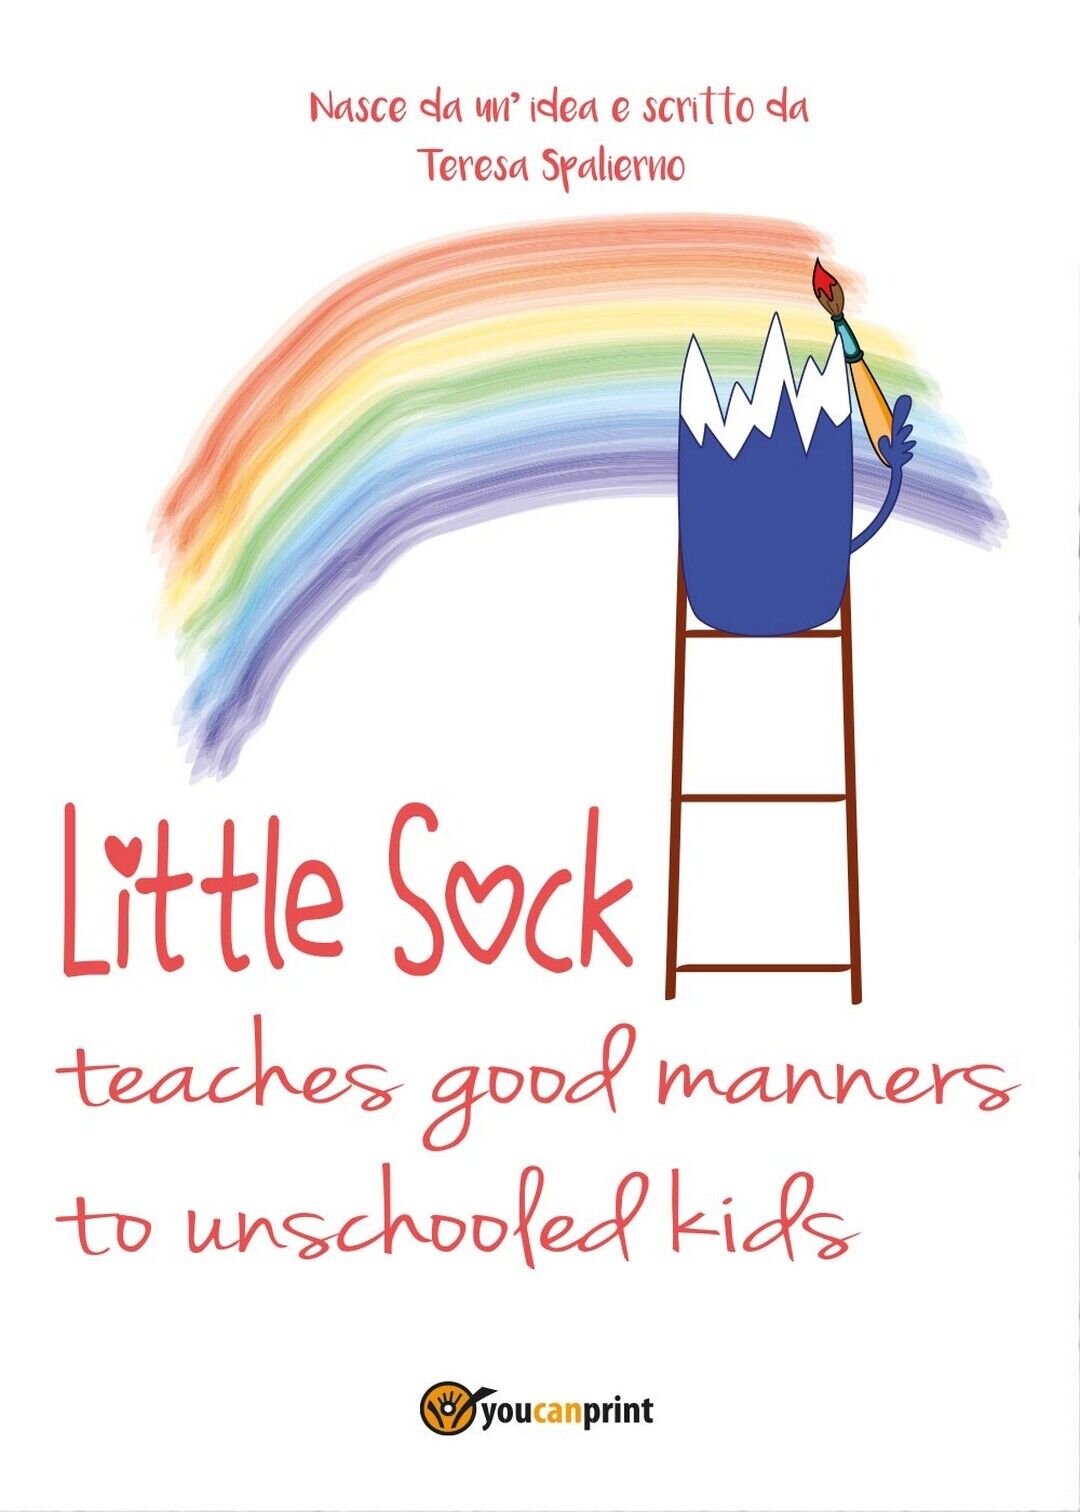 Little sock teaches good manners to unschooled kids, Teresa Spalierno,  2017 libro usato